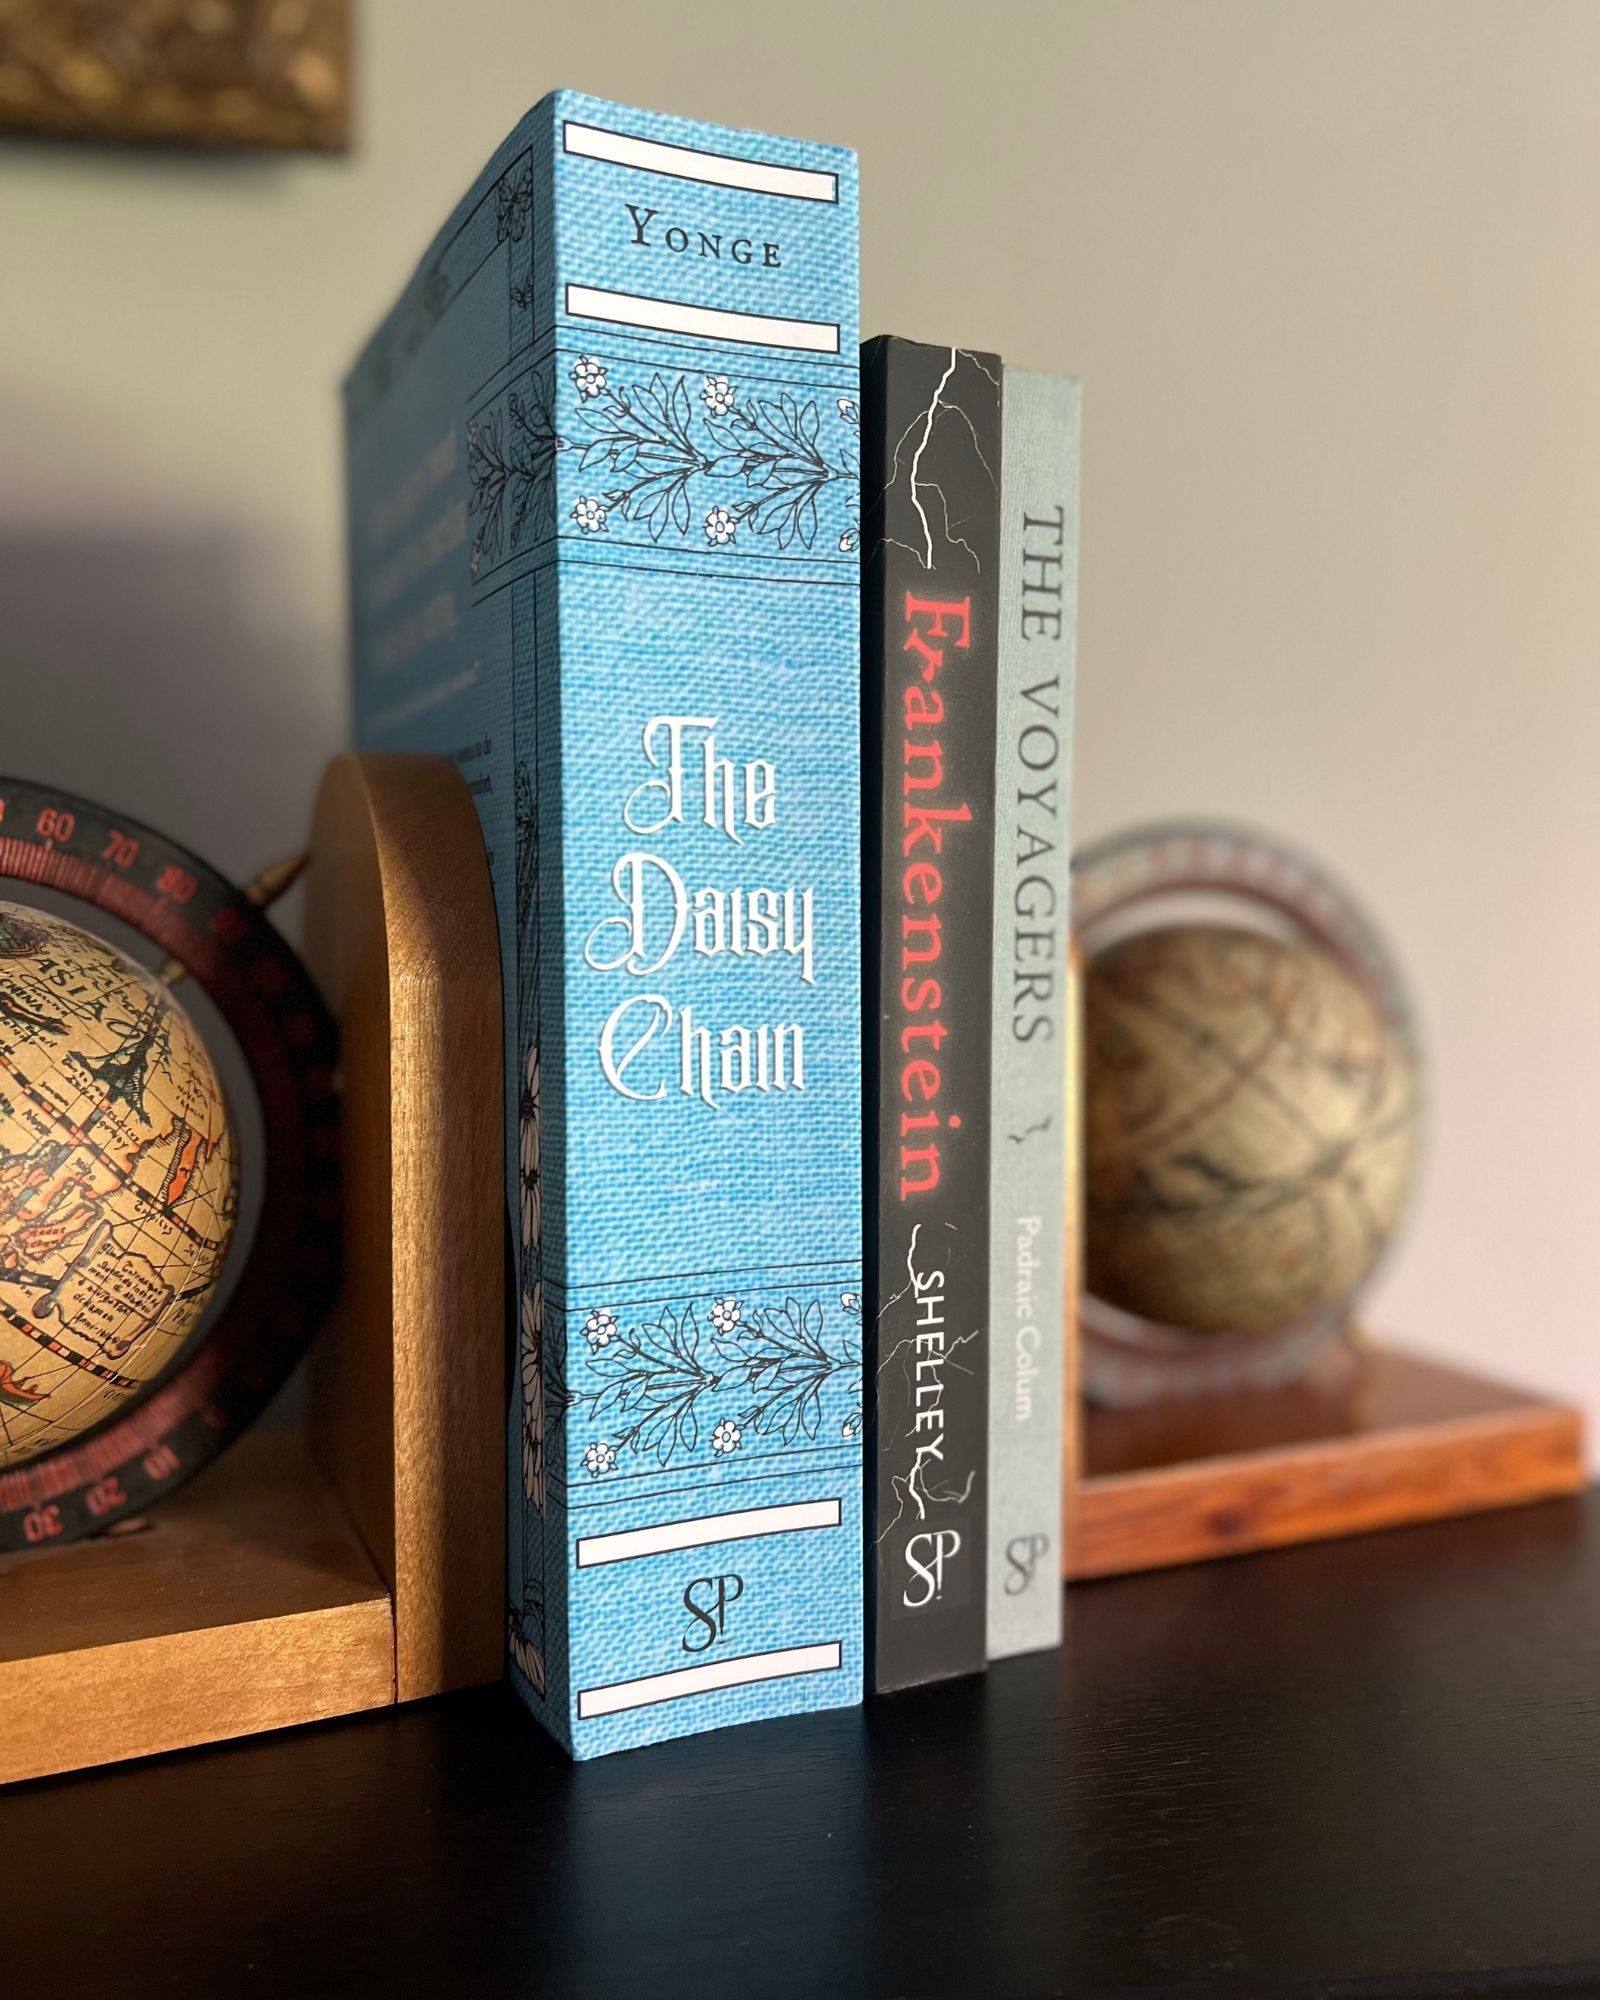 Globe bookends hold the paperback editions of Smidgen Press books, spines facing viewer. From left to right, "The Daisy Chain," "Frankenstein", and "The Voyagers".